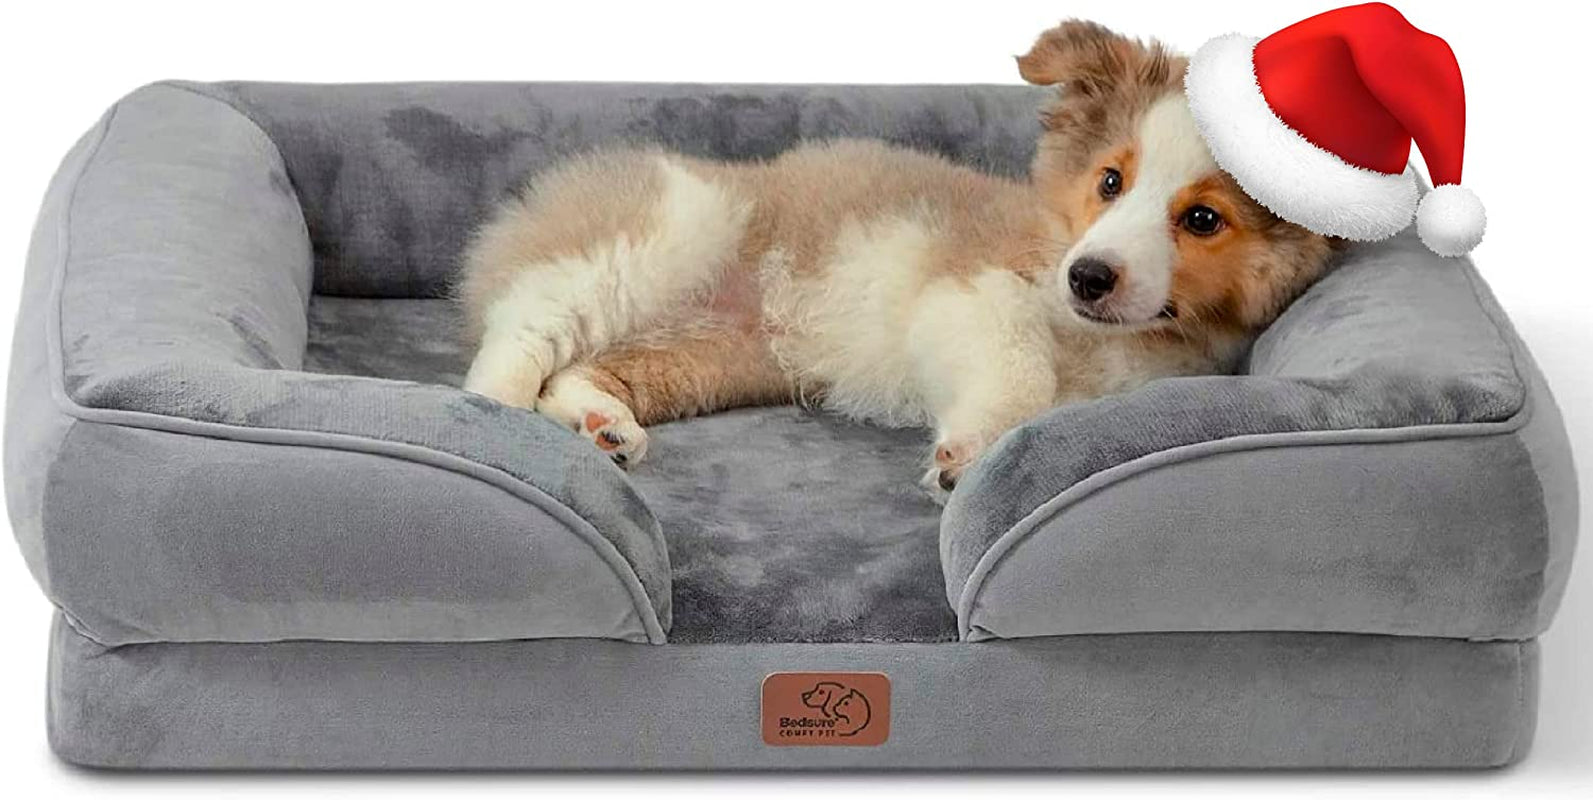 Orthopedic Dog Bed for Medium Dogs - Waterproof Dog Sofa Bed Medium, Supportive Foam Pet Couch Bed with Removable Washable Cover, Waterproof Lining and Nonskid Bottom, Grey